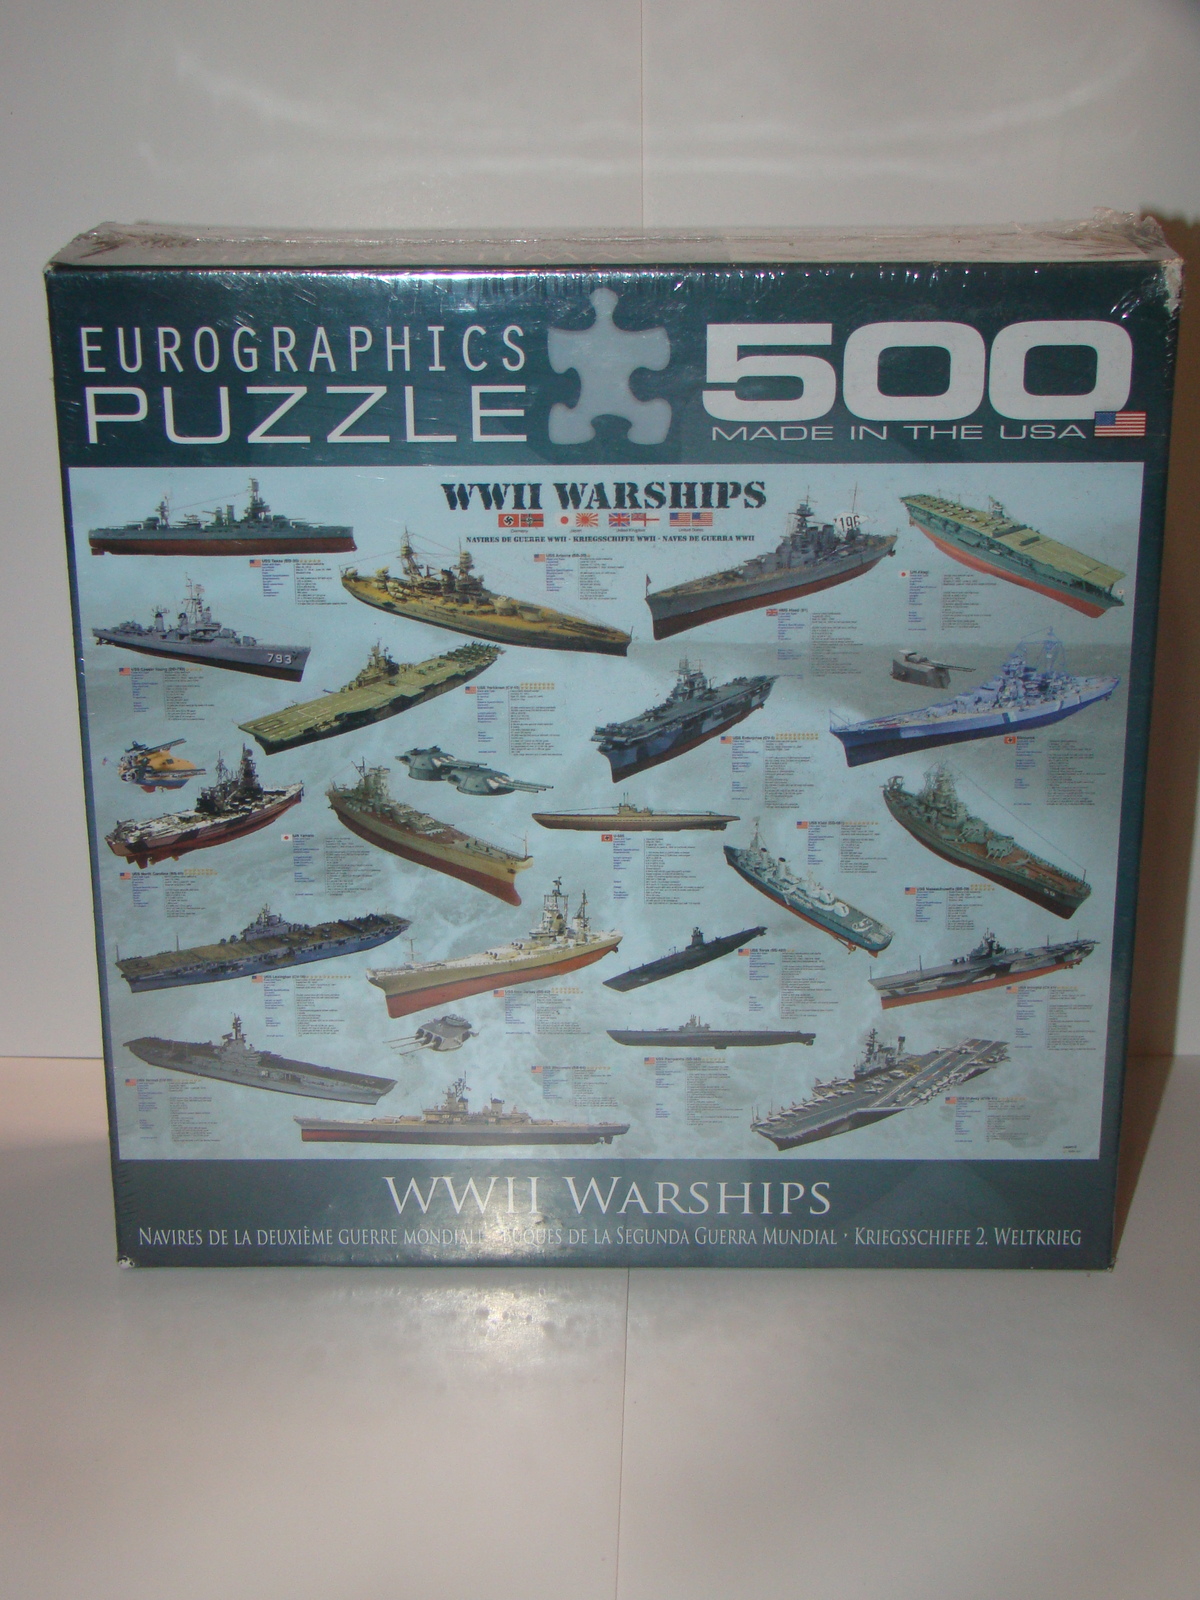 EUROGRAPHICS PUZZLE - WWII WARSHIPS - 500 Puzzle Pieces (New) - $45.00